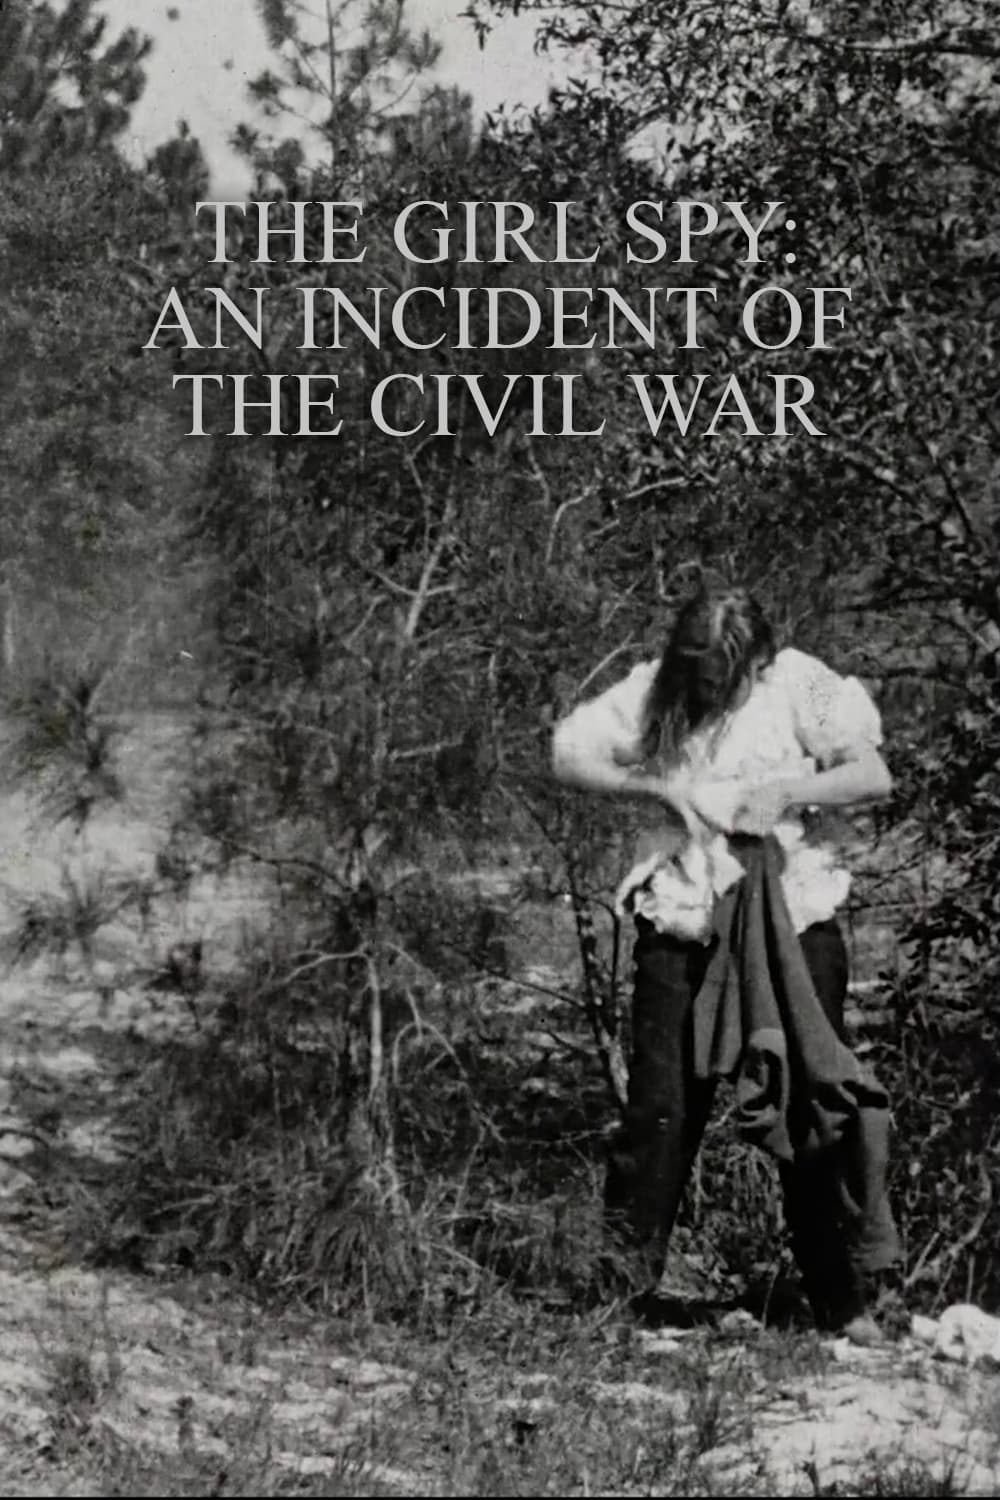 The Girl Spy: An Incident of the Civil War